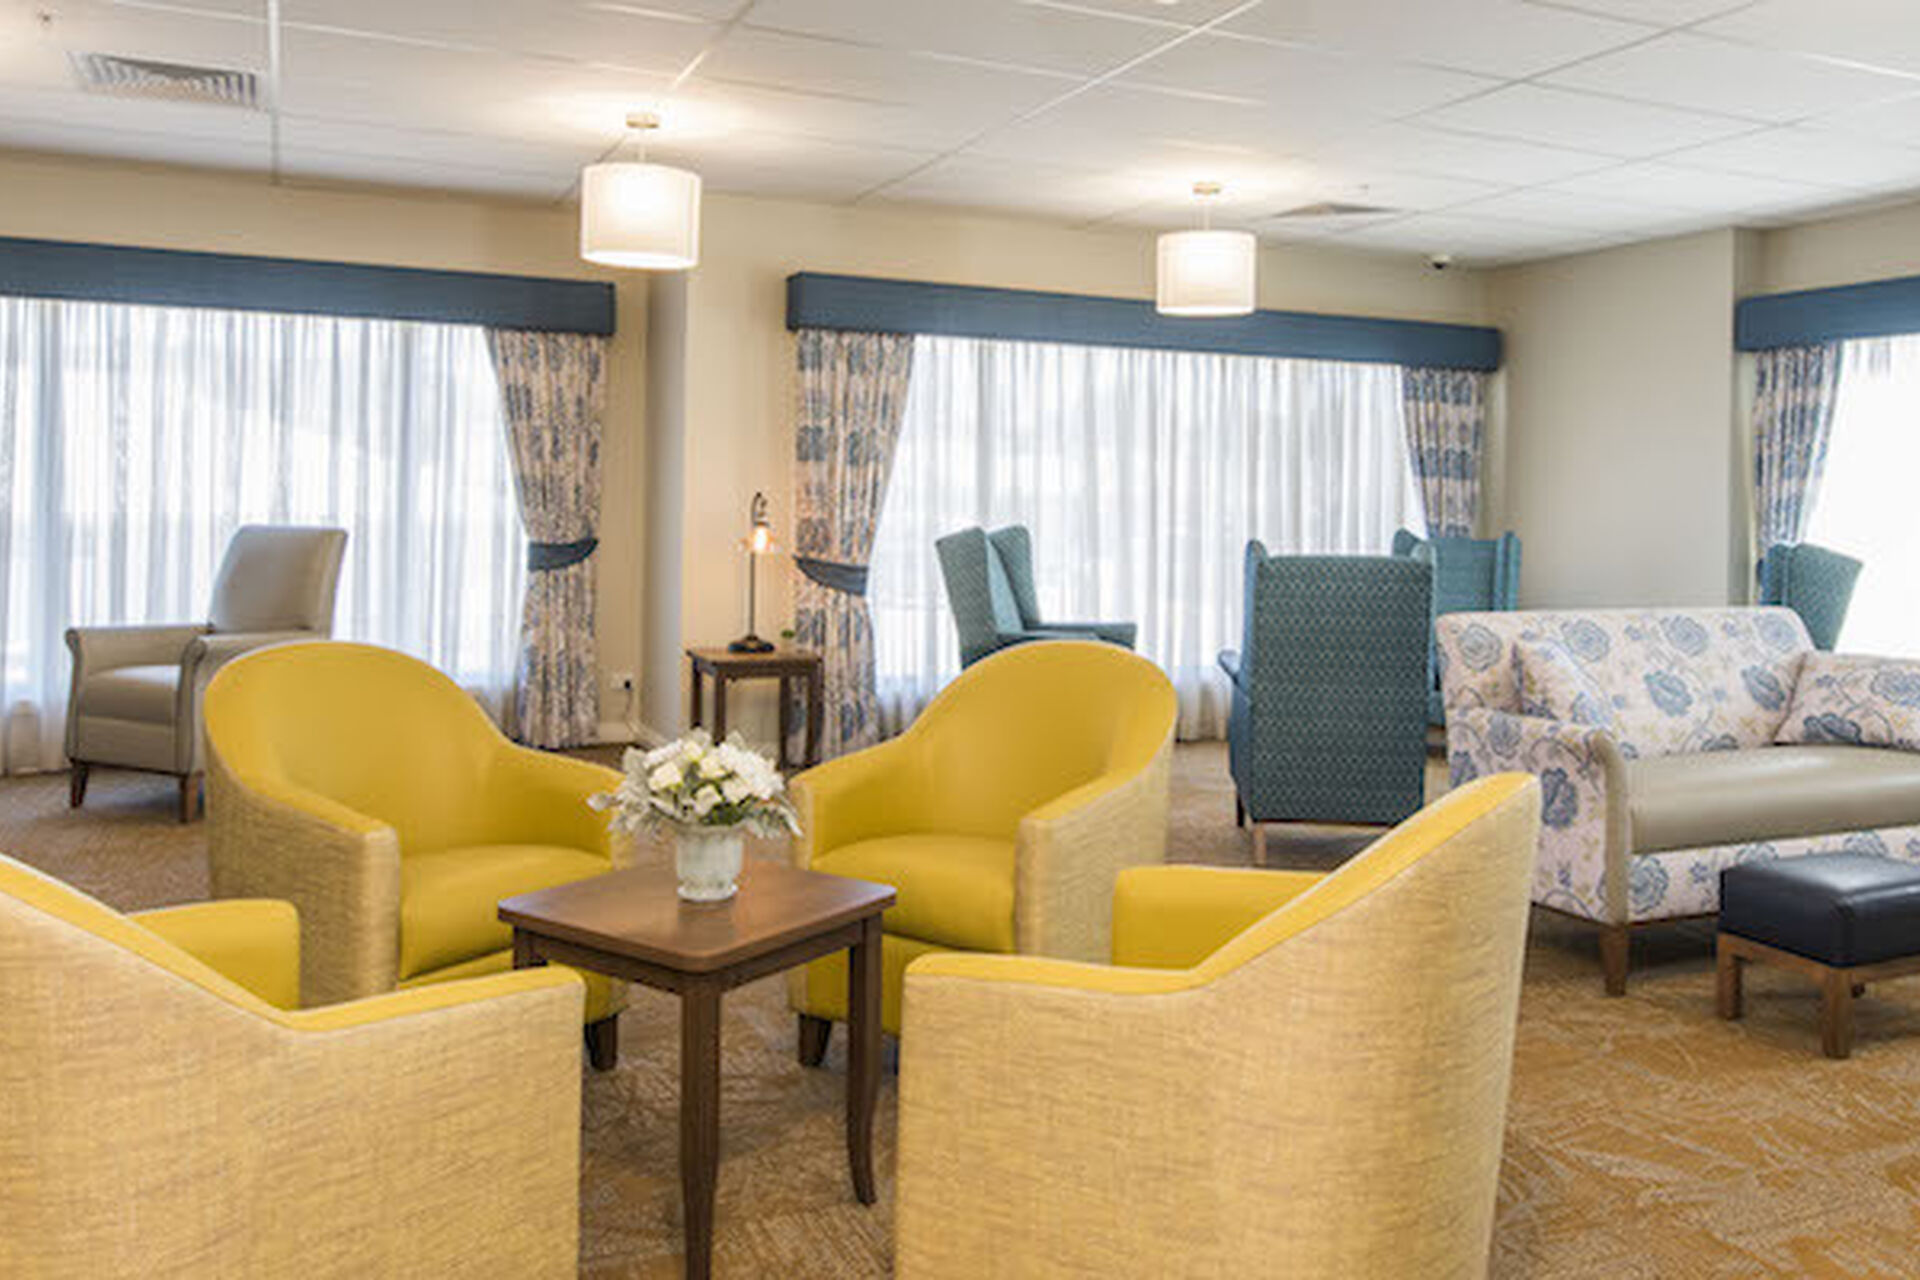 communal lounge room for nursing home residents at baptistcare kintyre lodge residential aged care home in dubbo